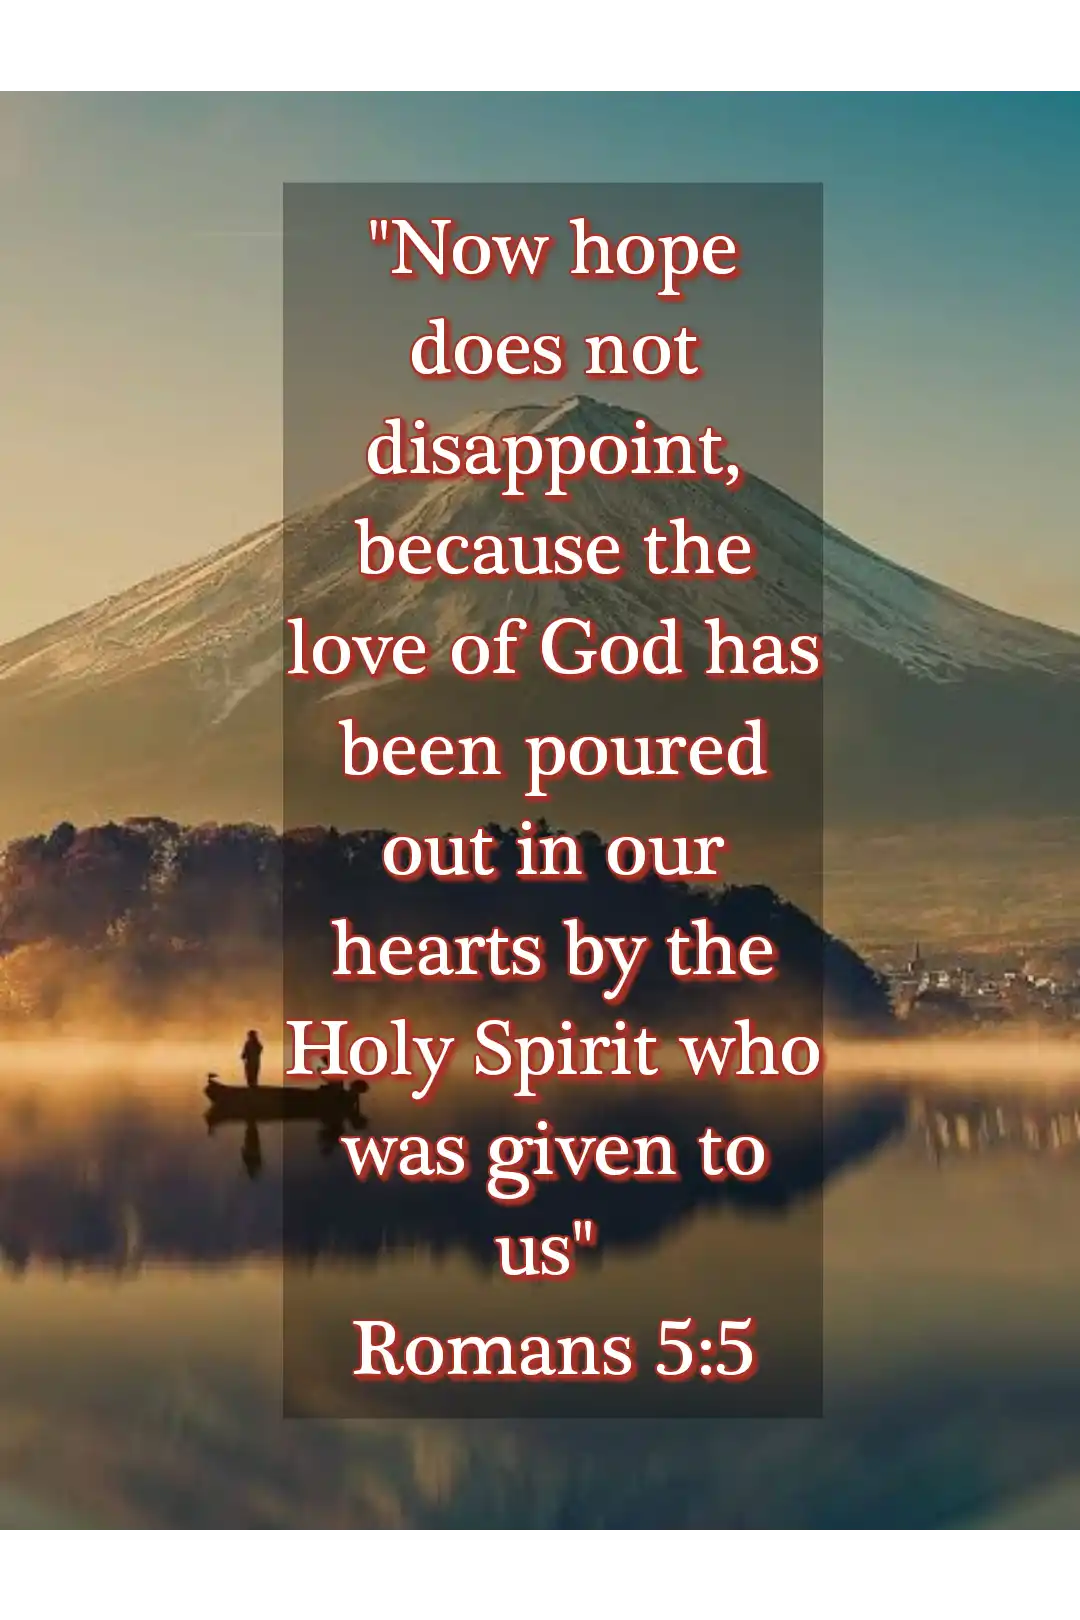 Bible verses about god’s love for us (Romans 5:5)